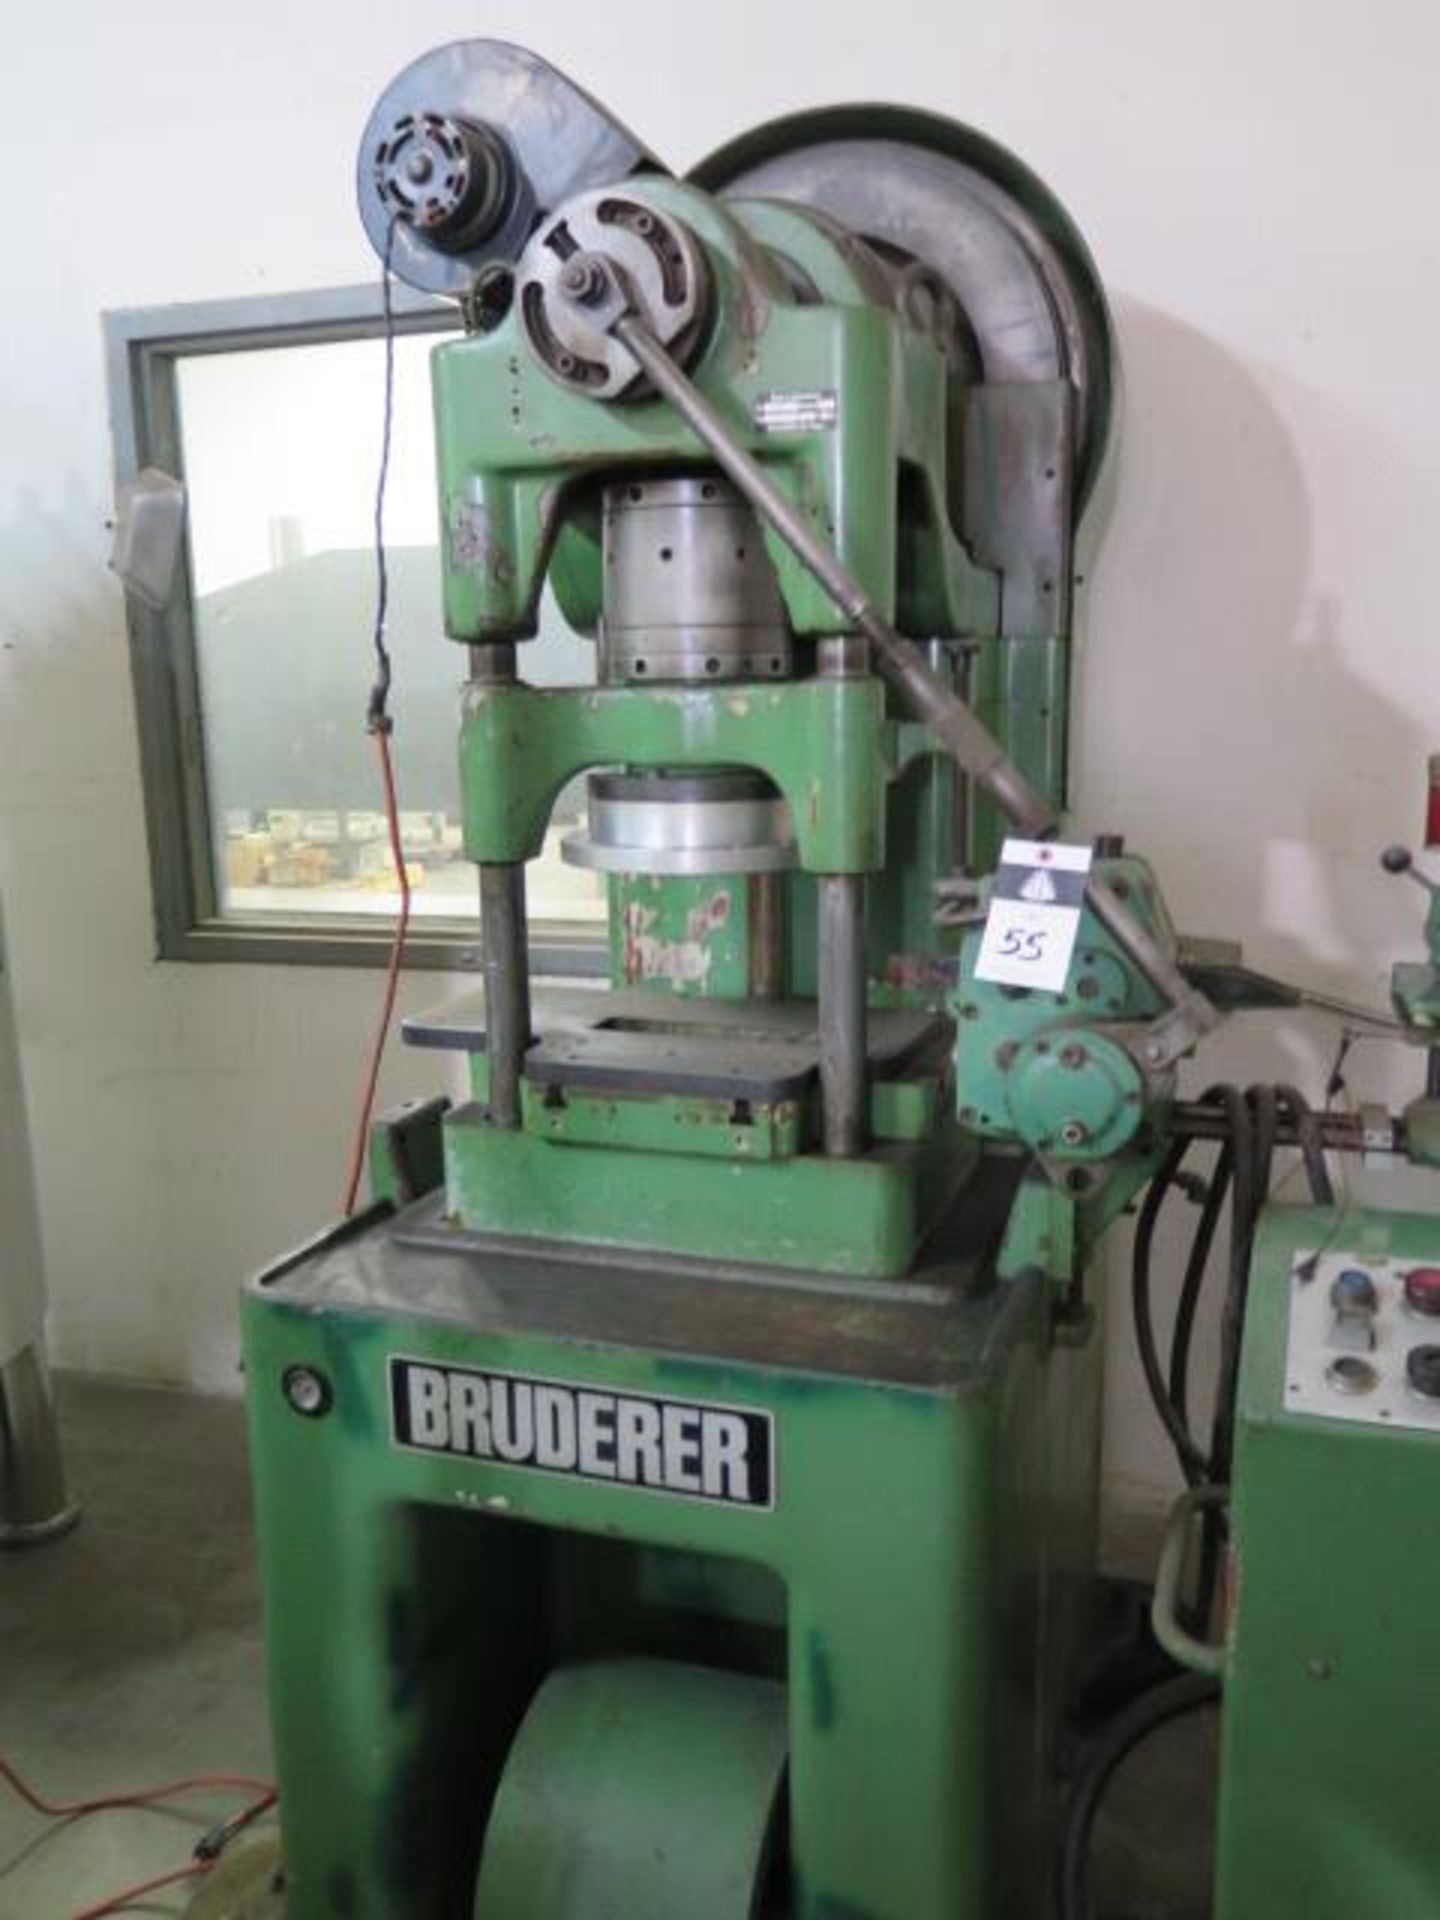 Bruderer BSTA-30 High Speed Stamping Machine s/n 2722 w/ Bruderer Controls, SOLD AS IS - Image 2 of 13